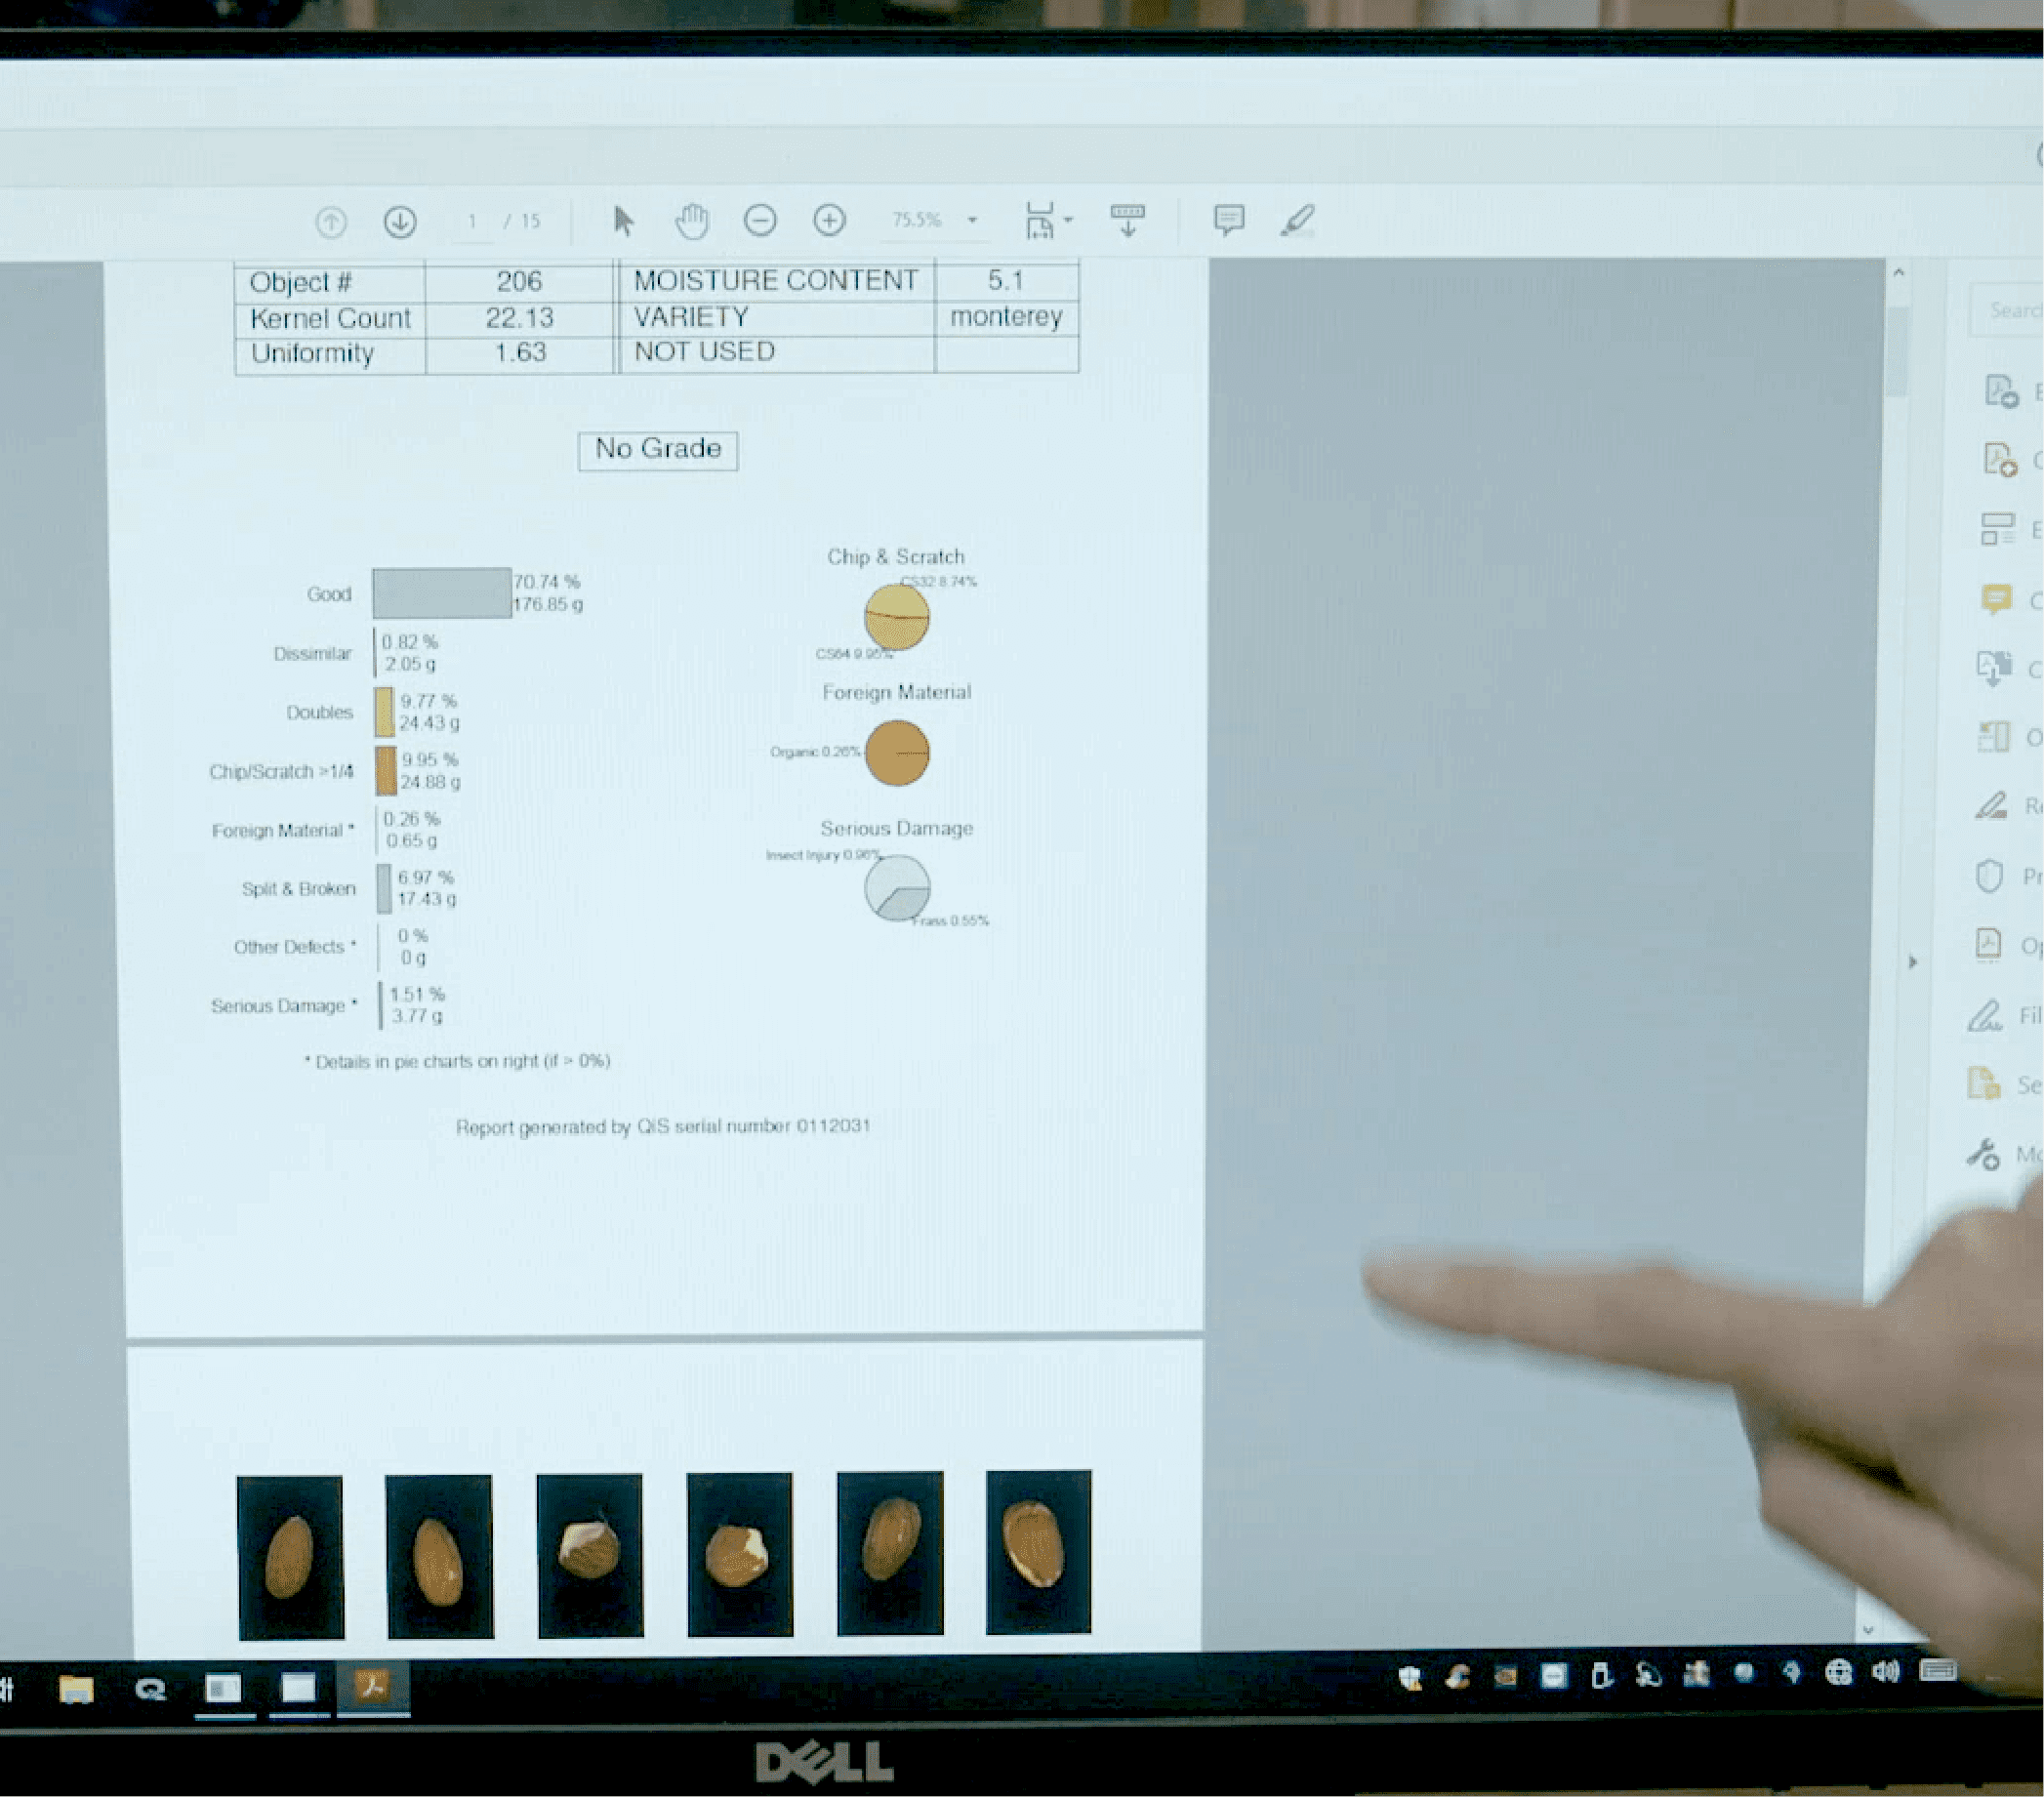 closeup of finger pointing to data sheet with images of different types of almond conditions and grade charts and scales in percentages